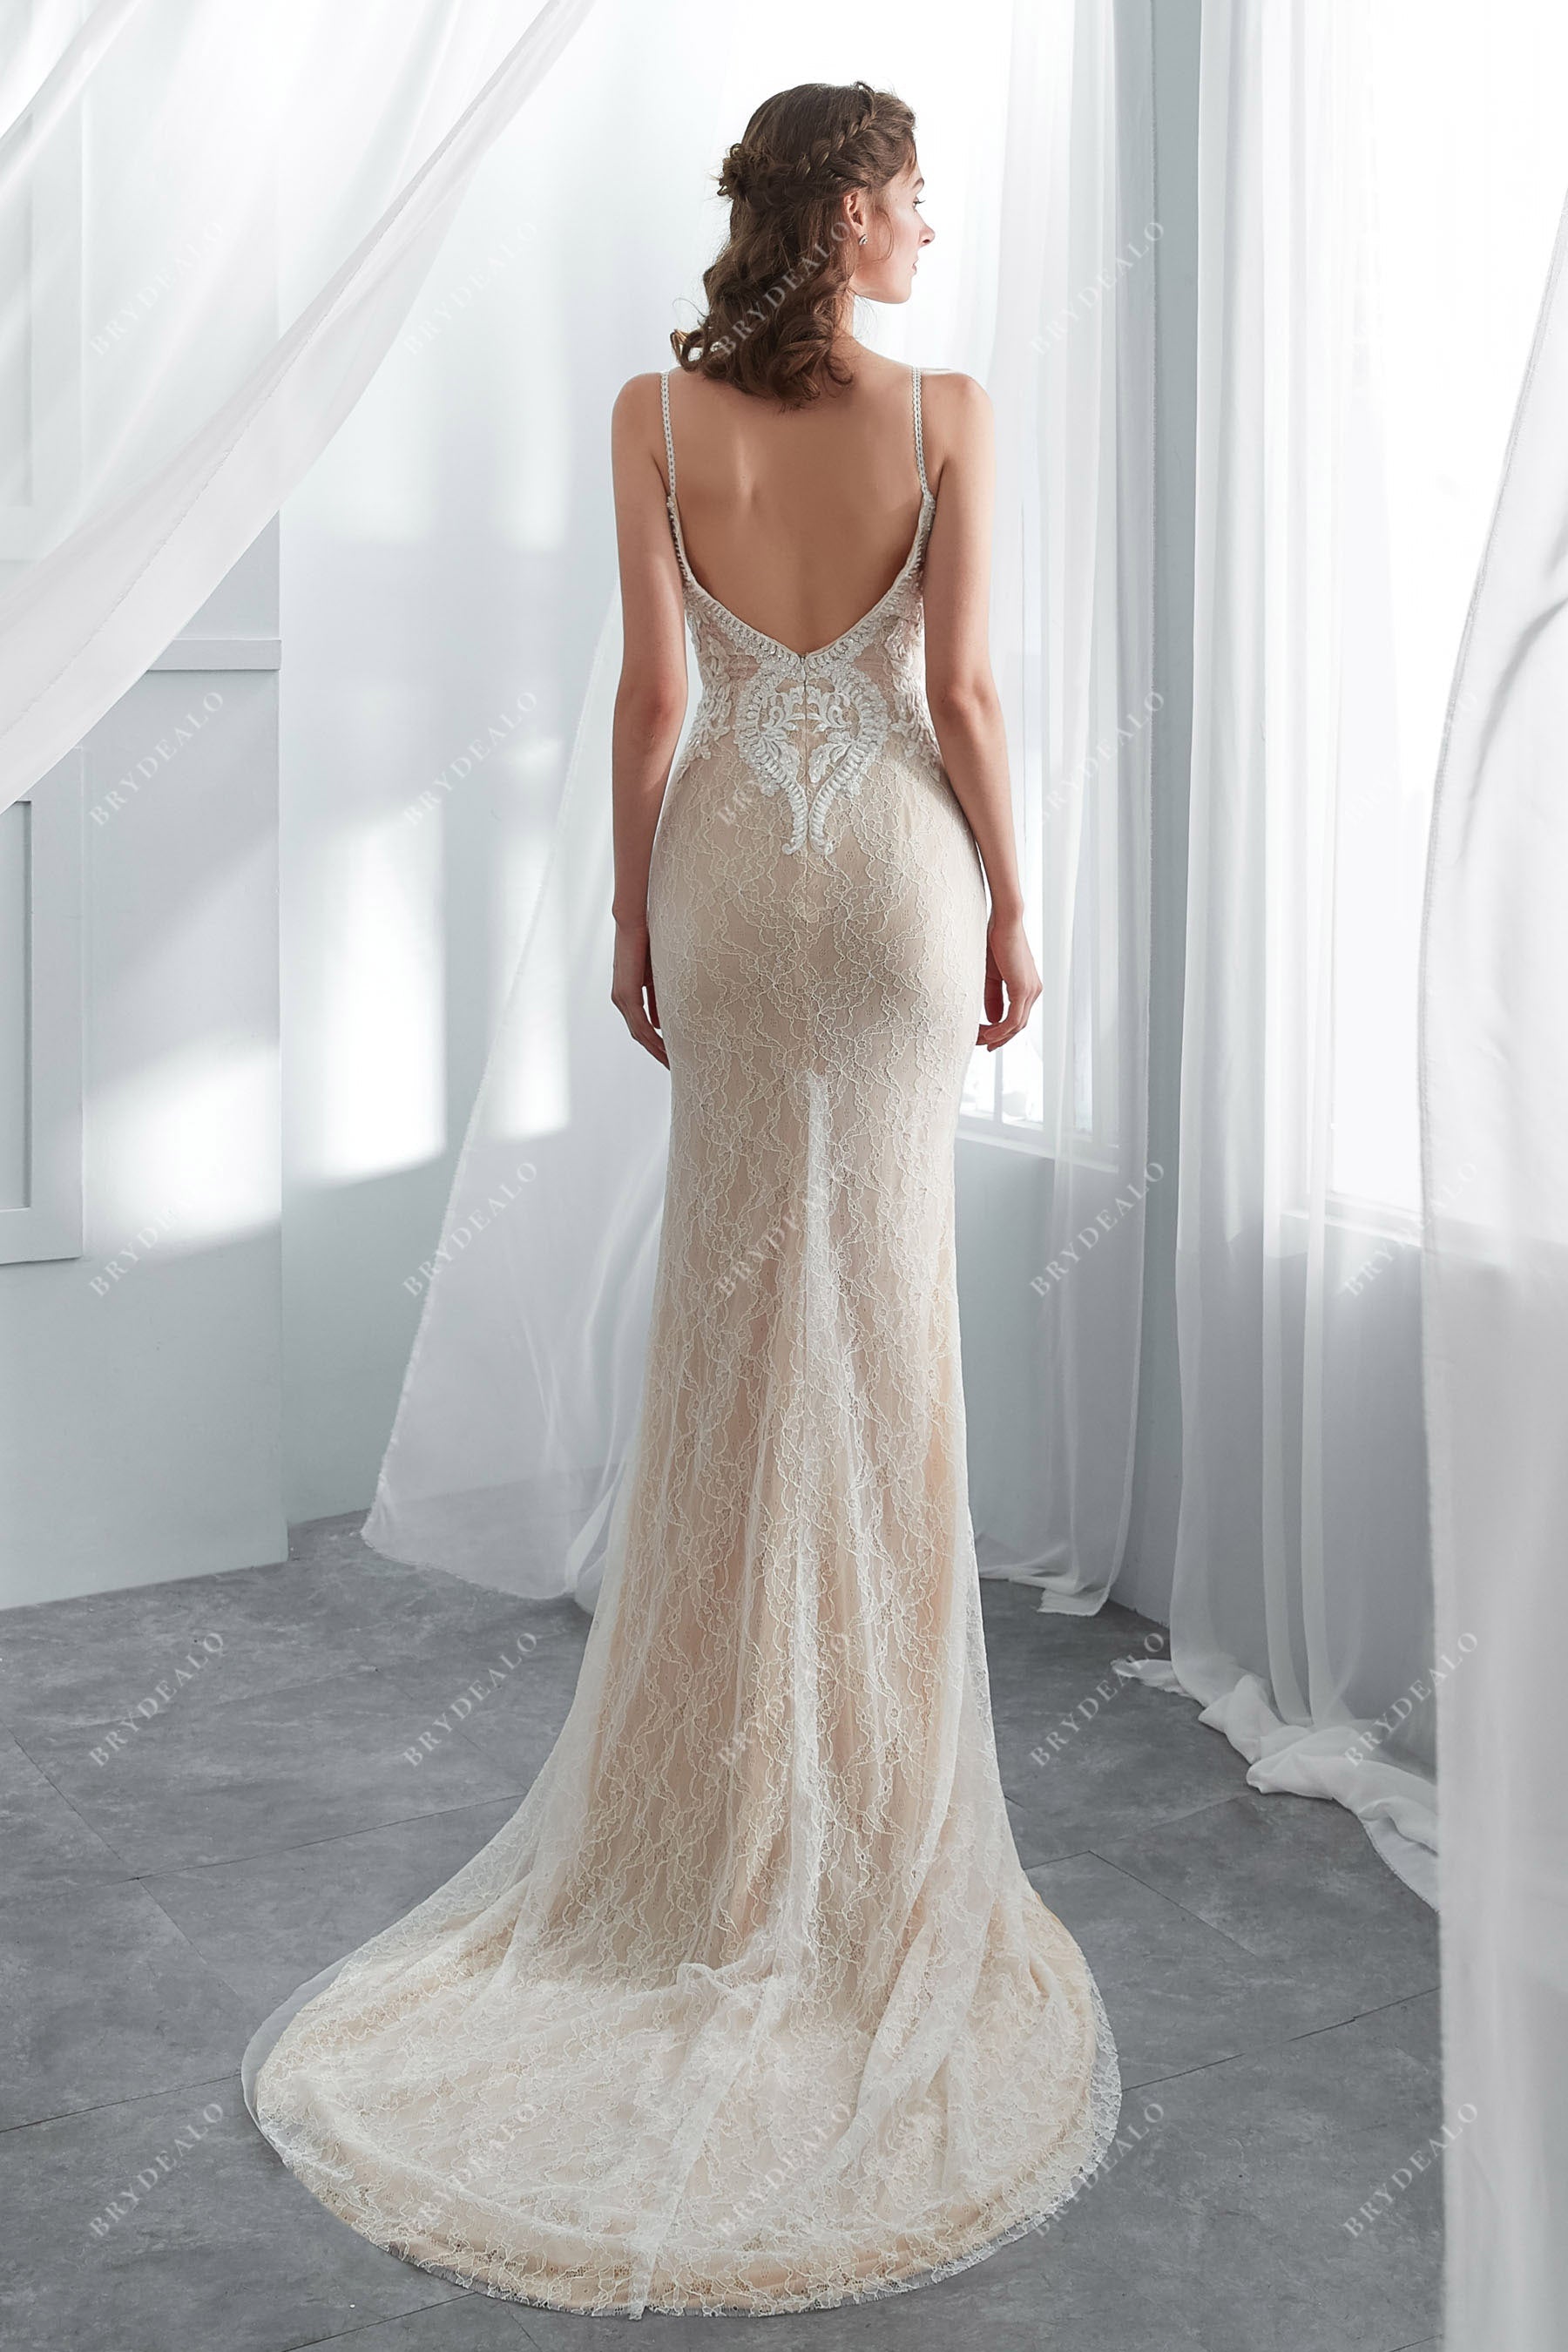 Sample Sale | Straps Lace Champagne Mermaid Bridal Gown